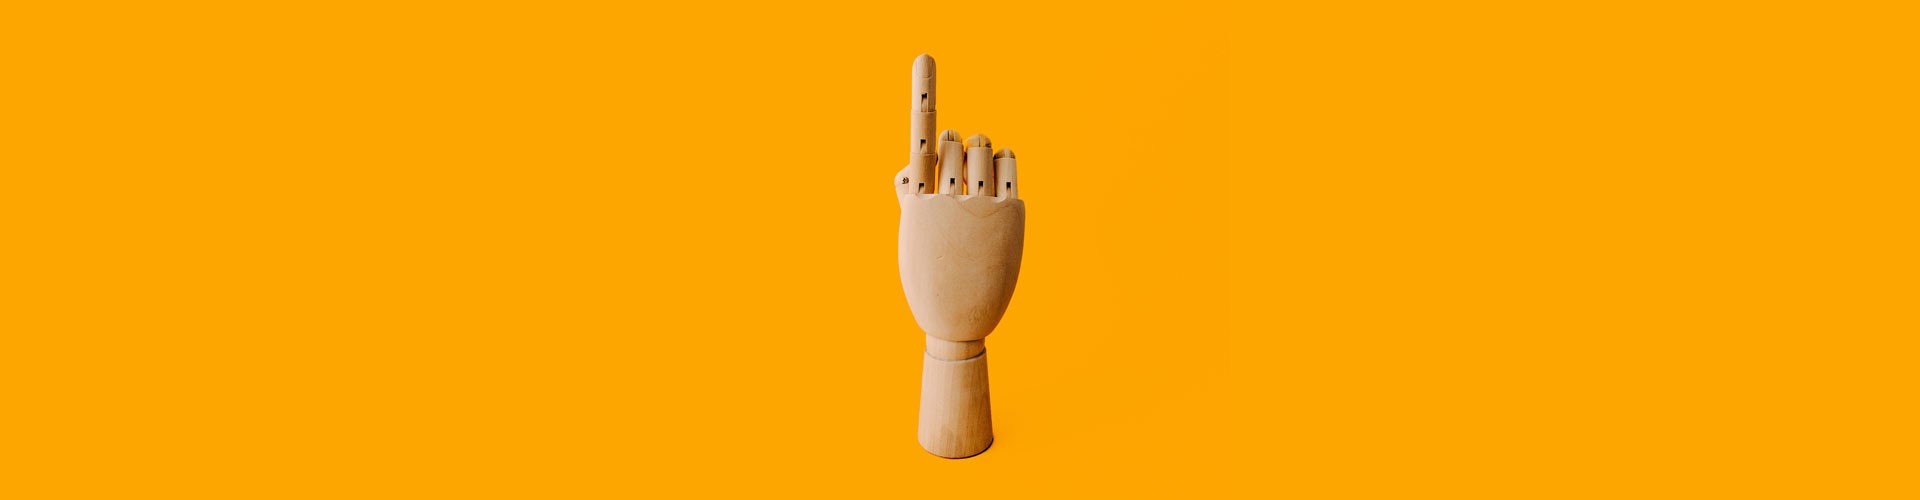 wooden hand pointing up on rich yellow background